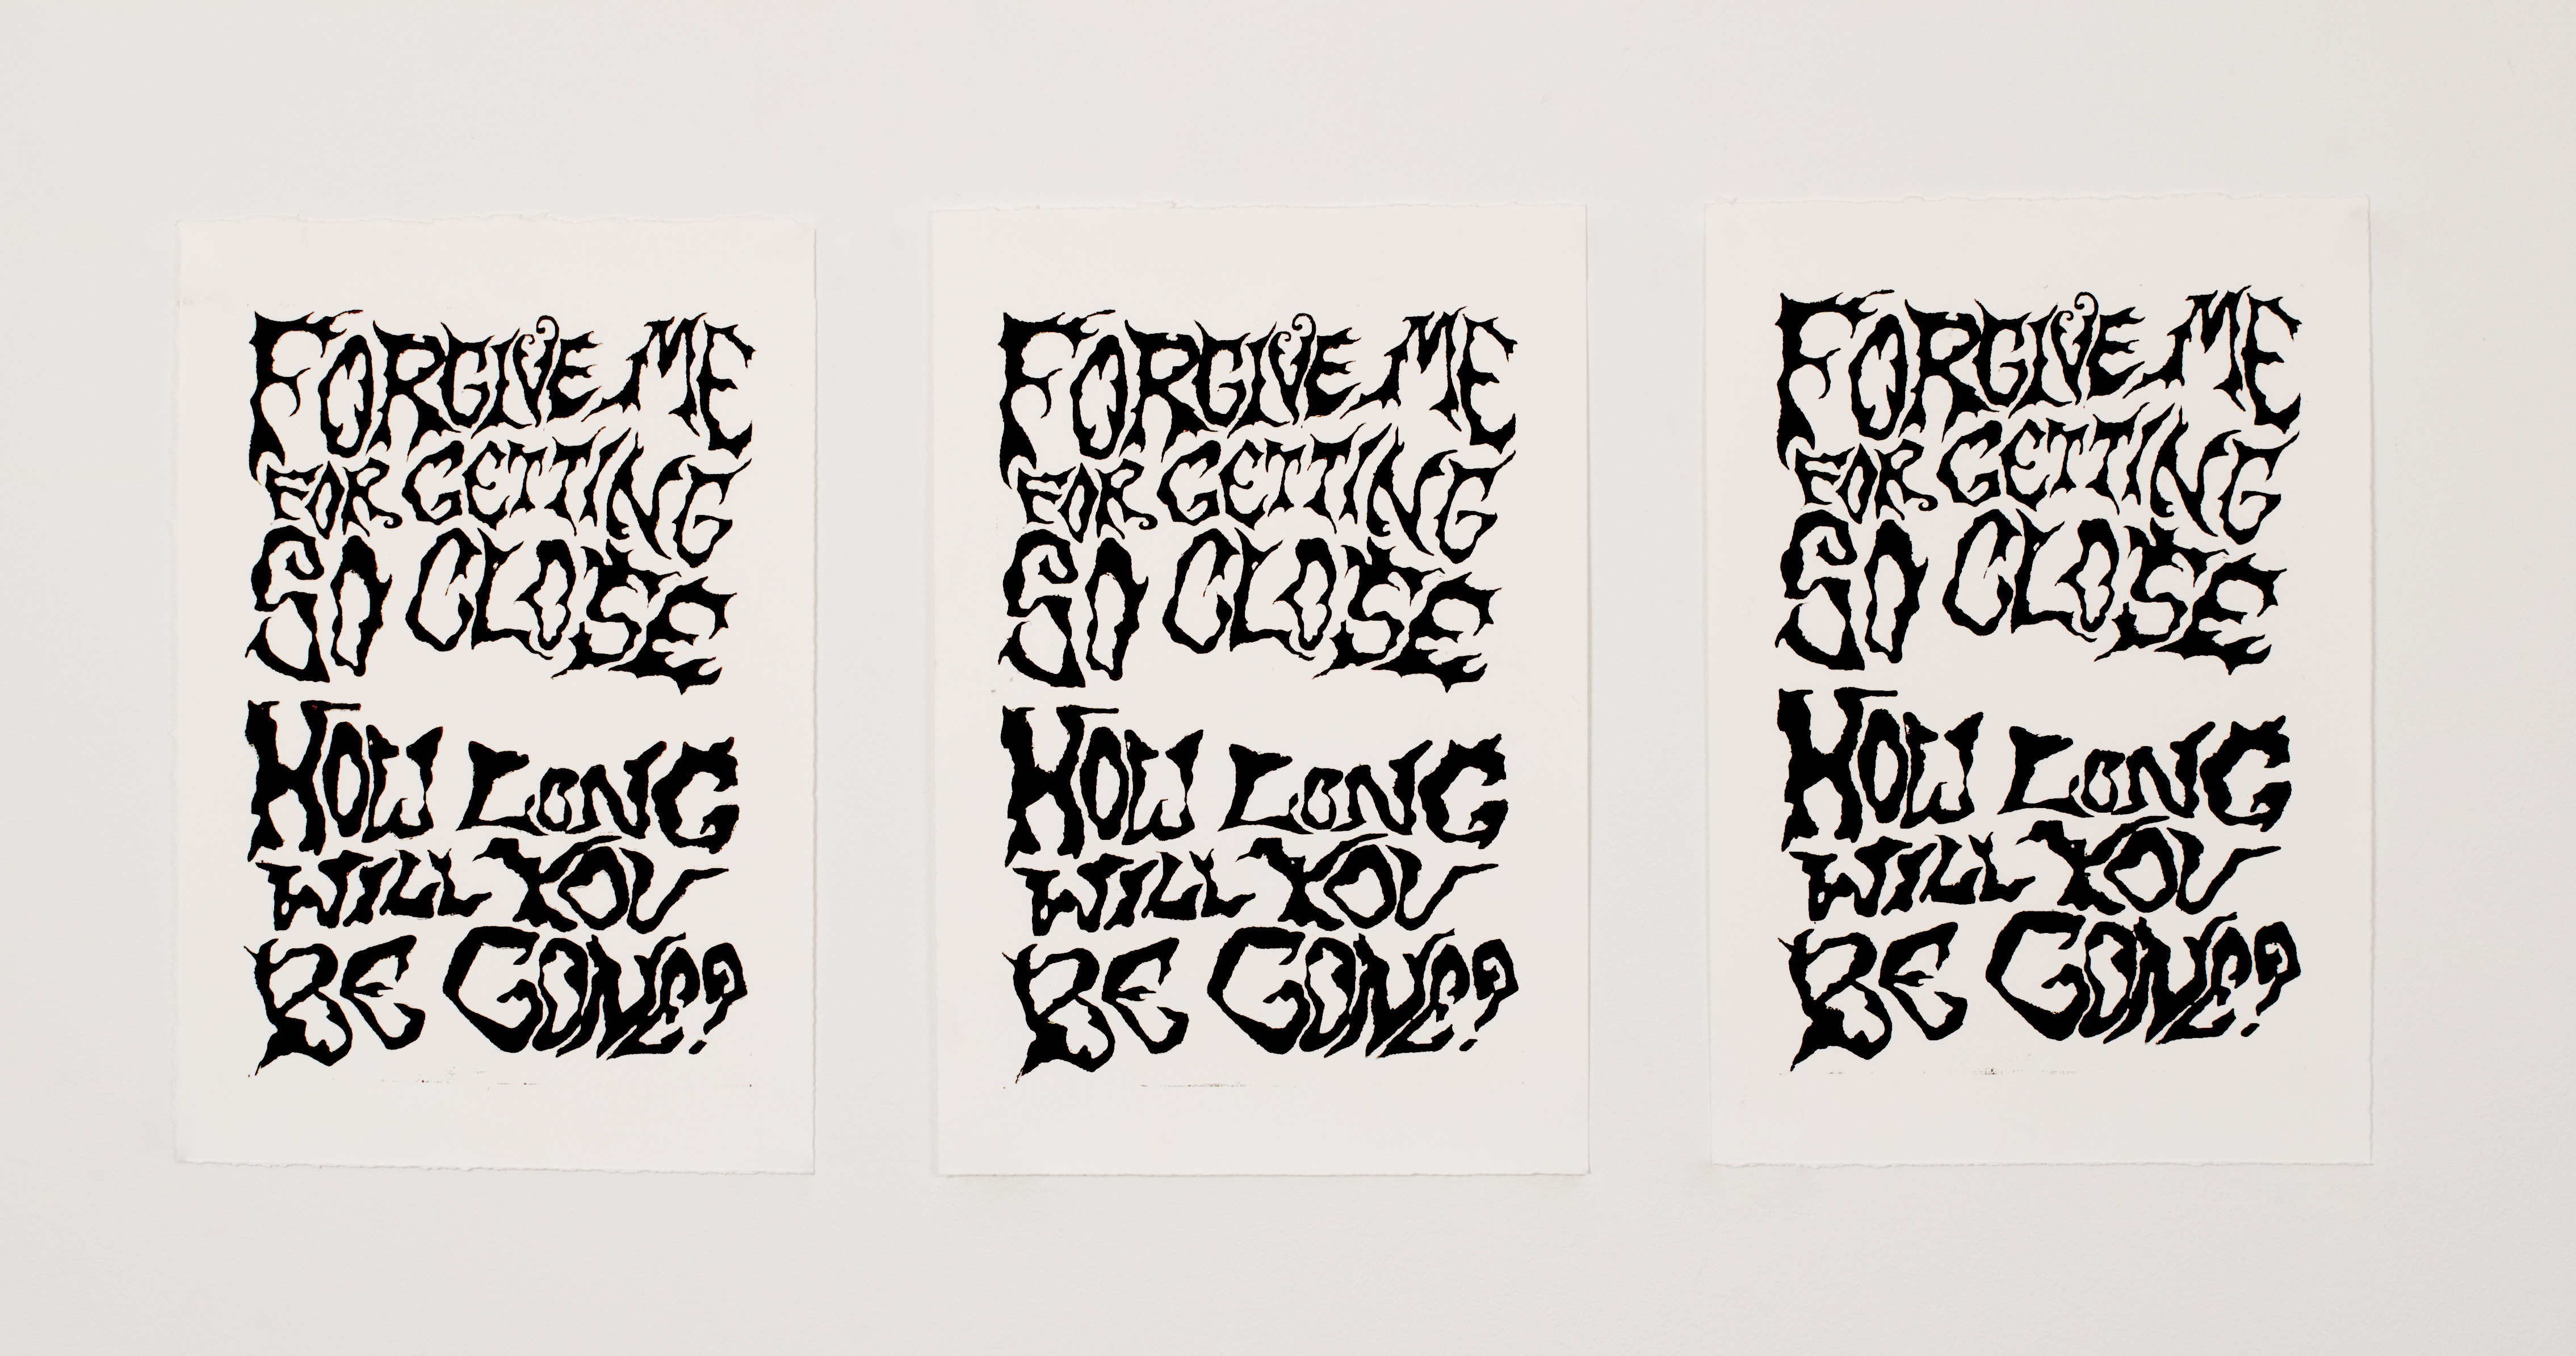 Forgive Me posters